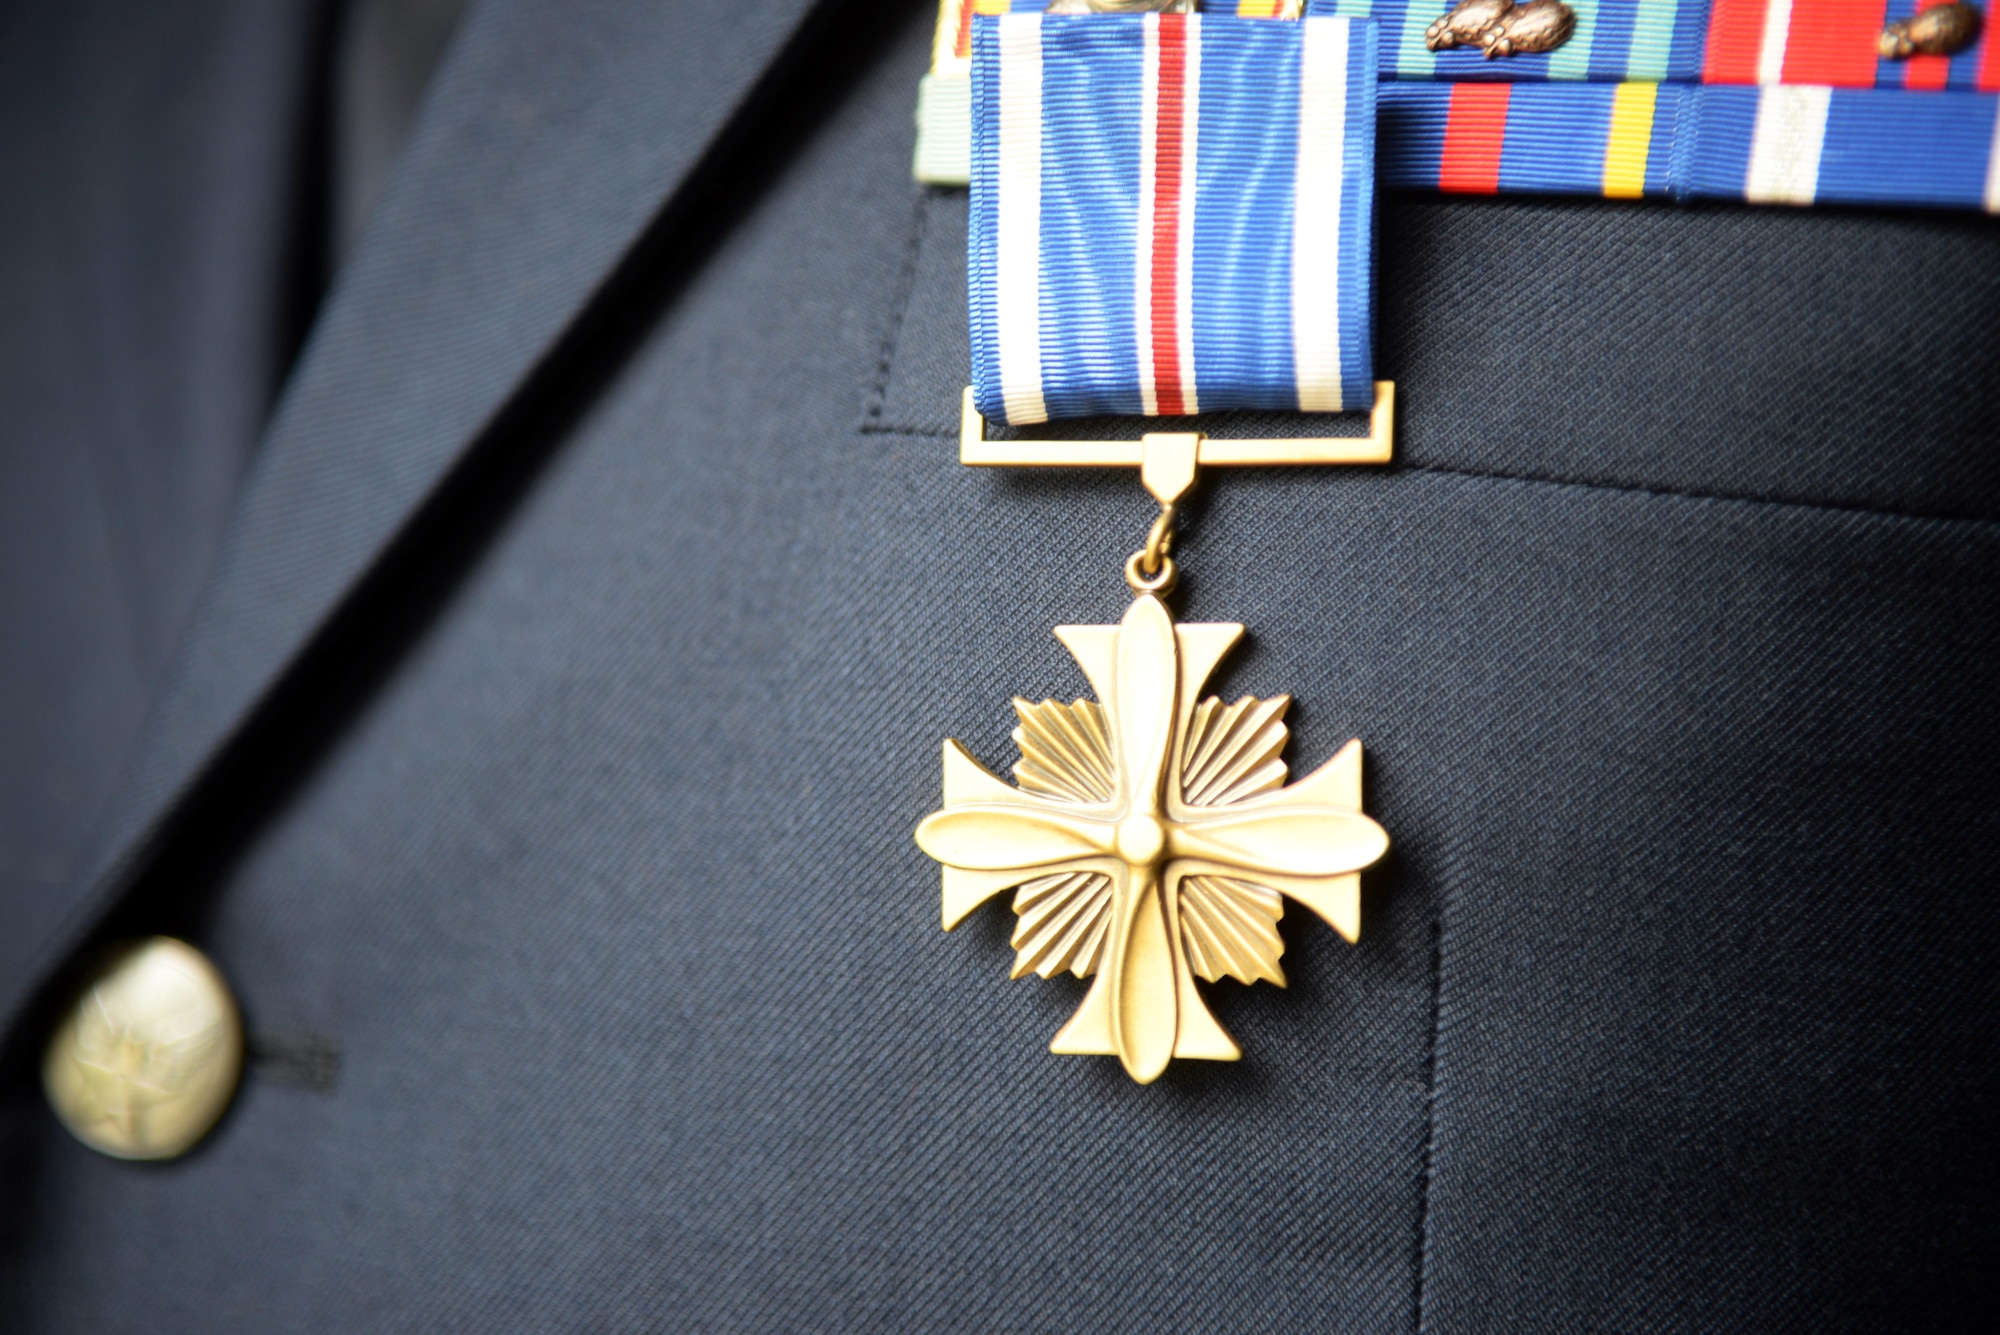 The Distinguished Flying Cross medal hangs off the uniform of U.S. Air Force Tech. Sgt. James M. McKay, 7th Special Operations Squadron special missions’ aviator, June 2, 2017, on RAF Mildenhall, England. McKay is the 80th Airman in Air Force Special Operations Command to receive this honor, a medal created in 1918 to reward those who display heroism or extraordinary achievement while participating in an aerial flight. (U.S. Air Force photo by Airman 1st Class Tenley Long)